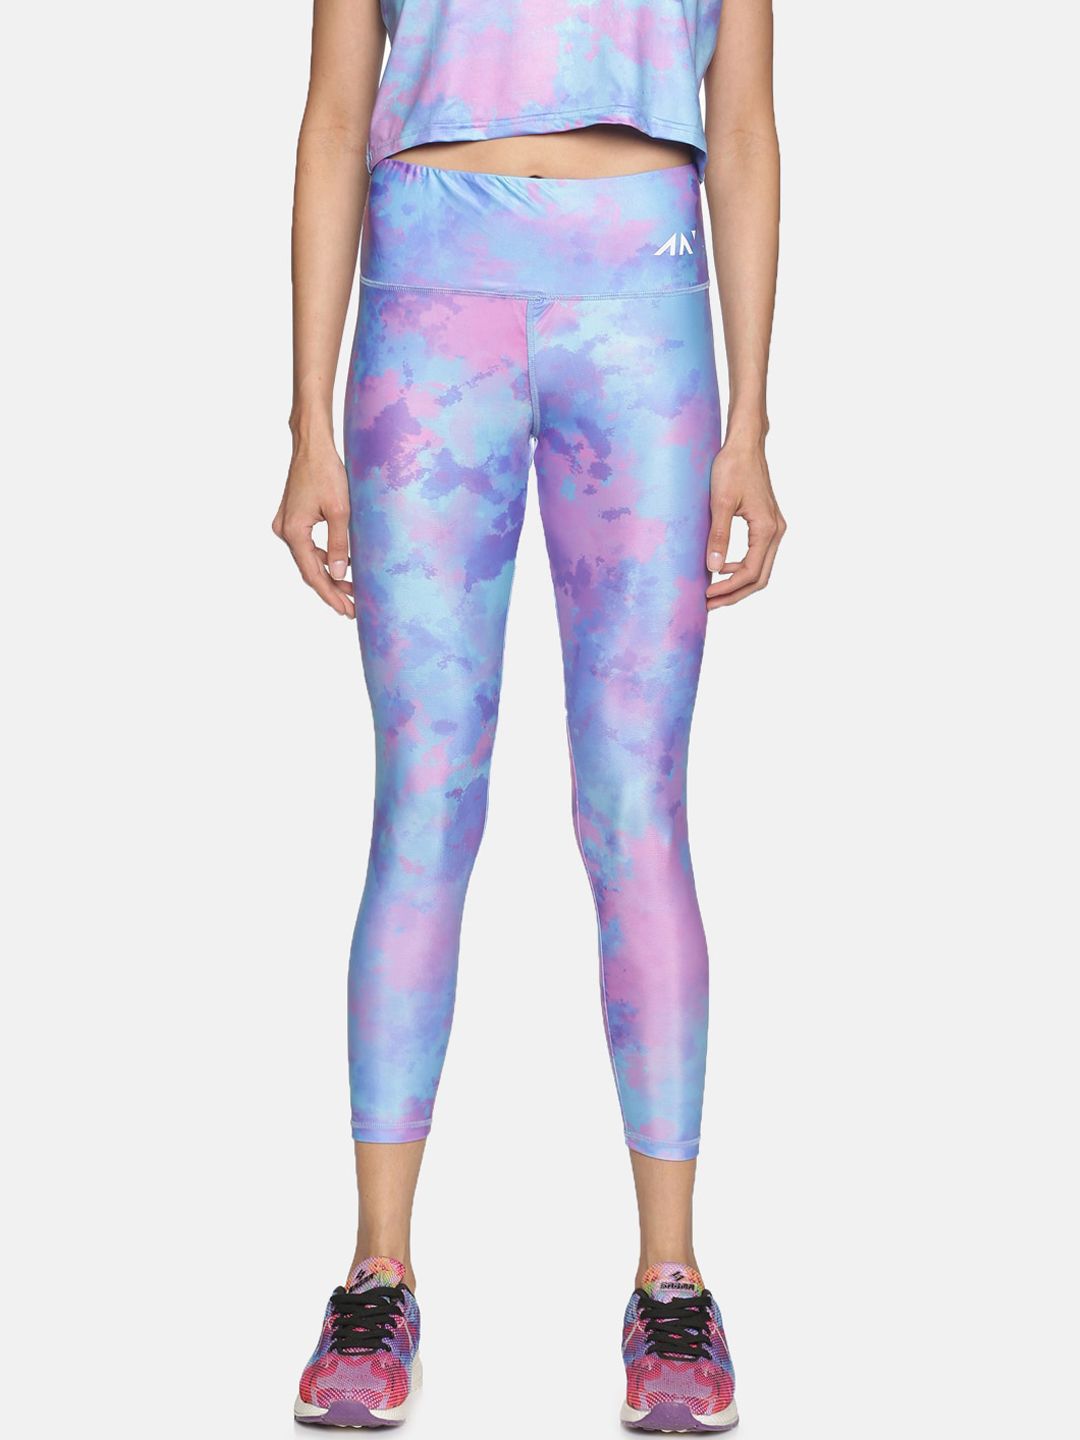 AESTHETIC NATION Woman Blue Contour Tie Dye Leggings Price in India